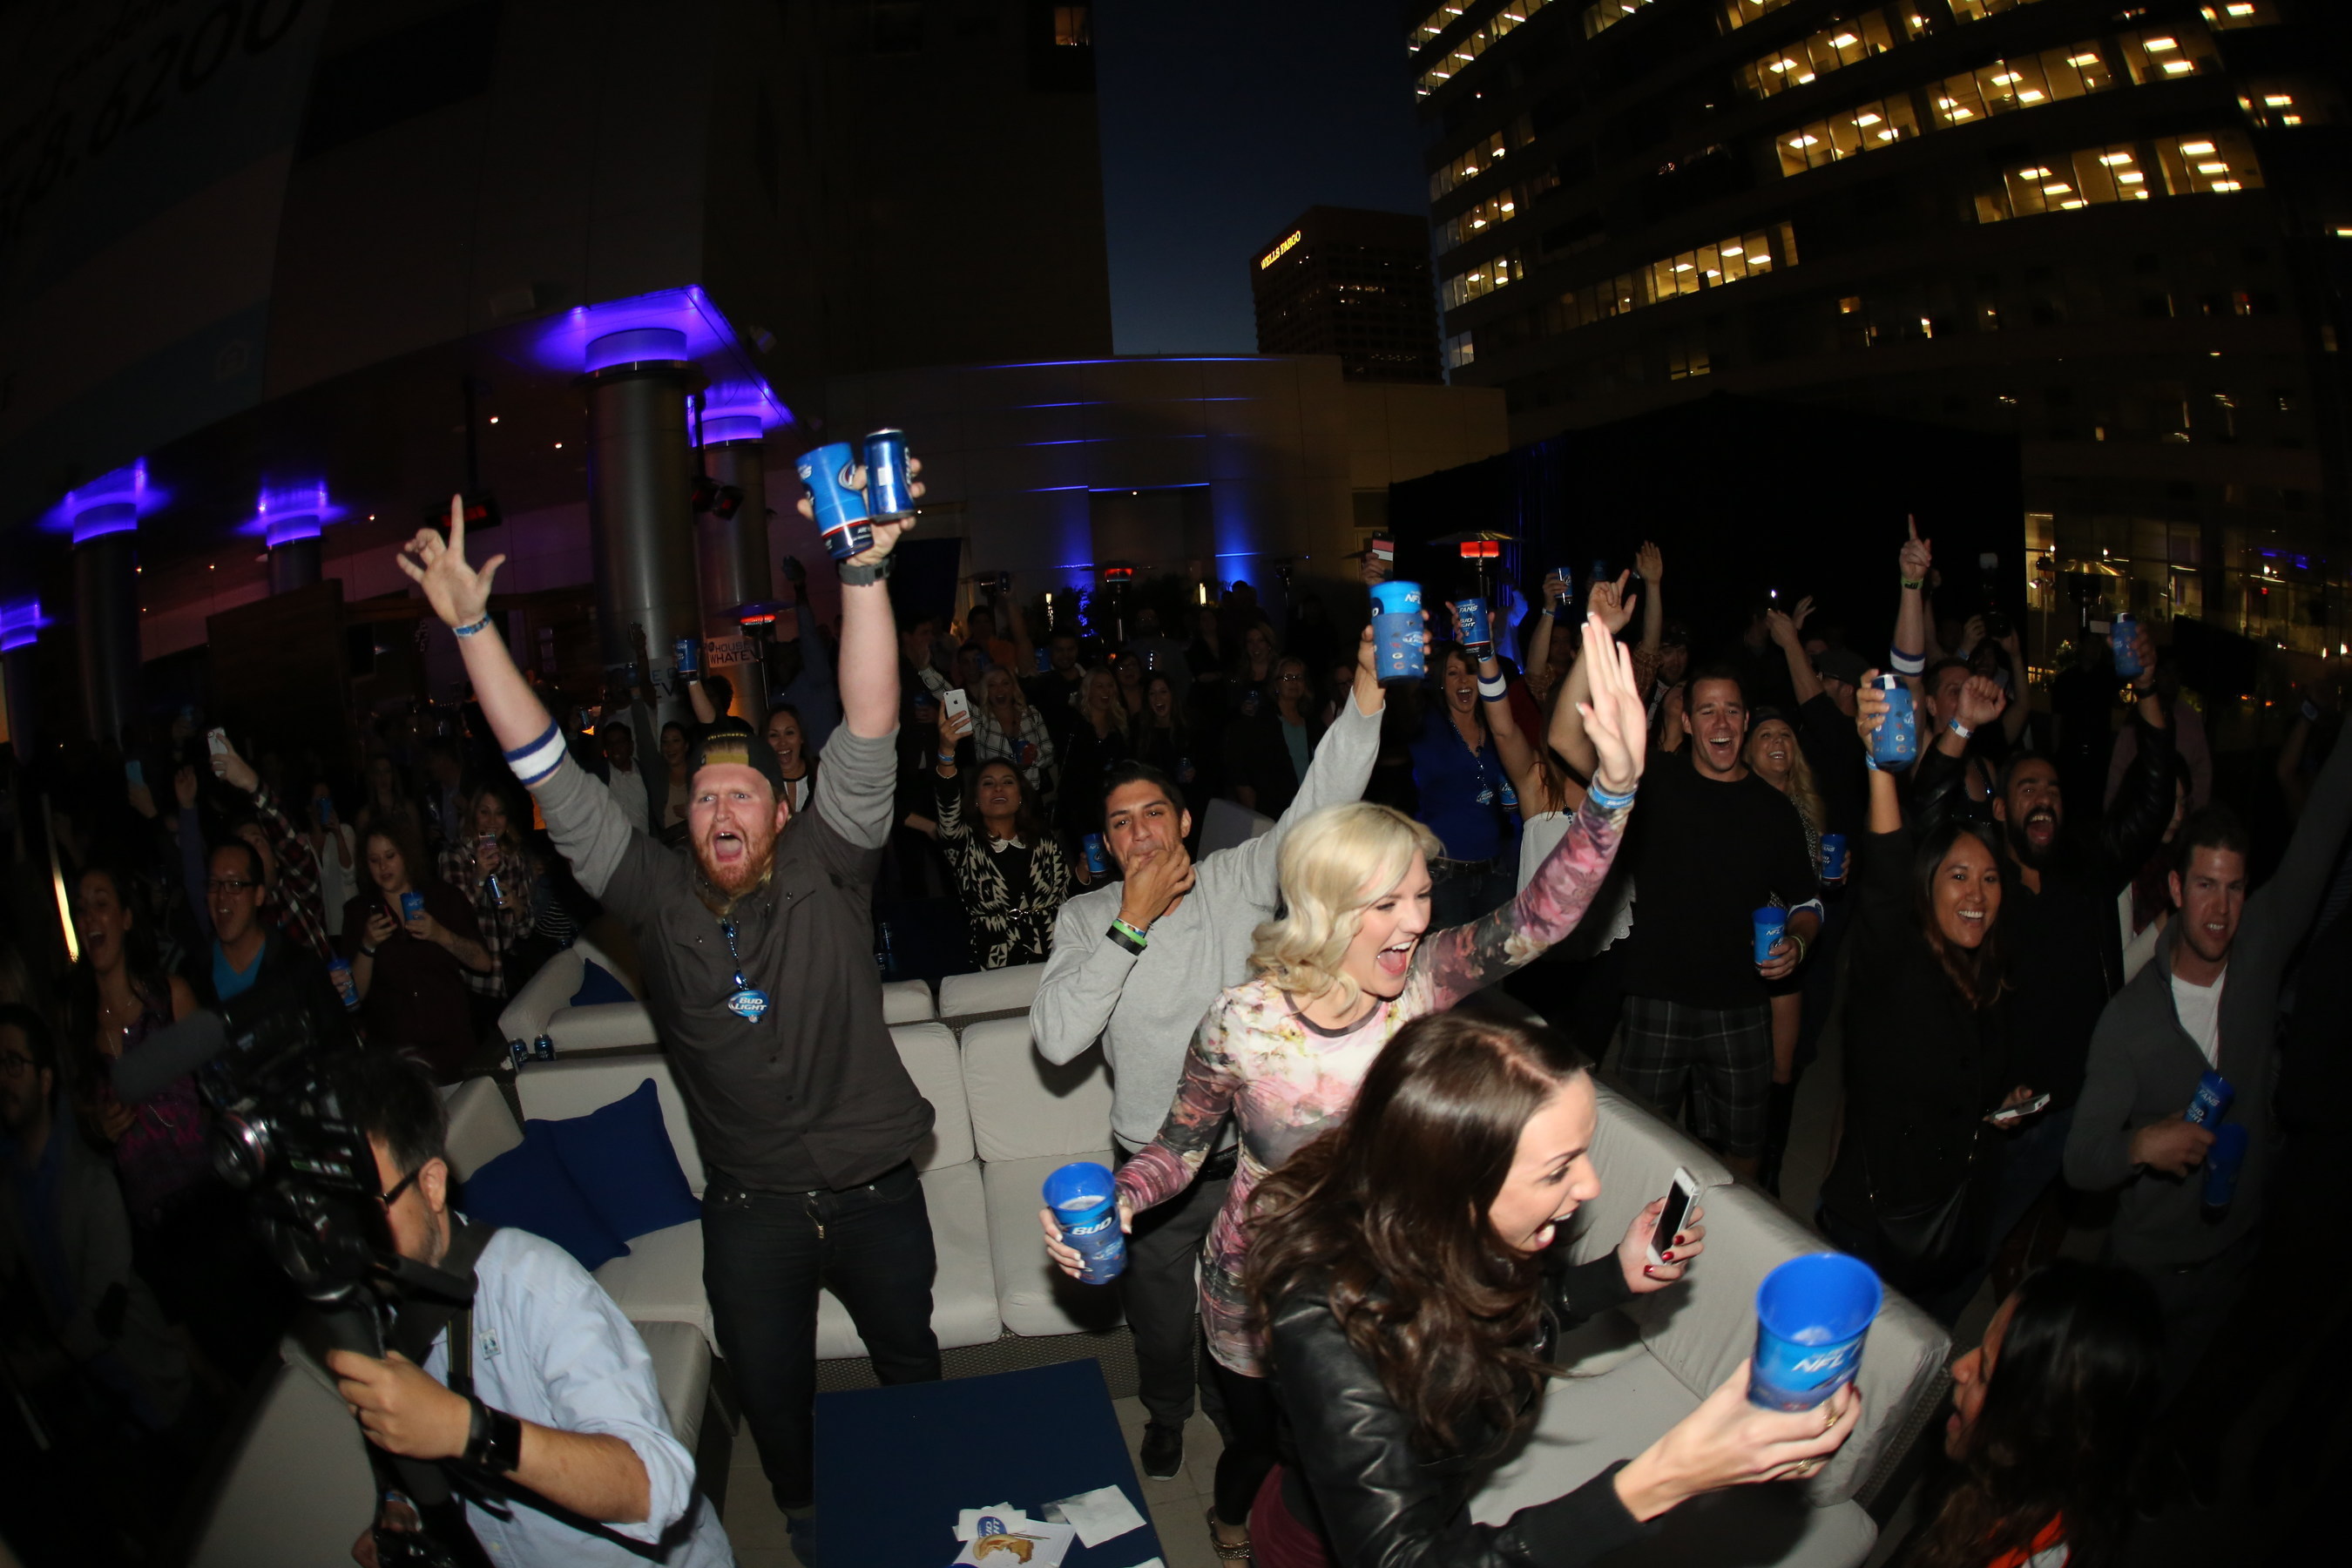 The crowd at Bud Light's Super Bowl XLIX unveil event in Phoeniz, Ariz. cheers after finding out they're all invited to the Steve Aoki's performance at Bud Light House of Whatever in January.